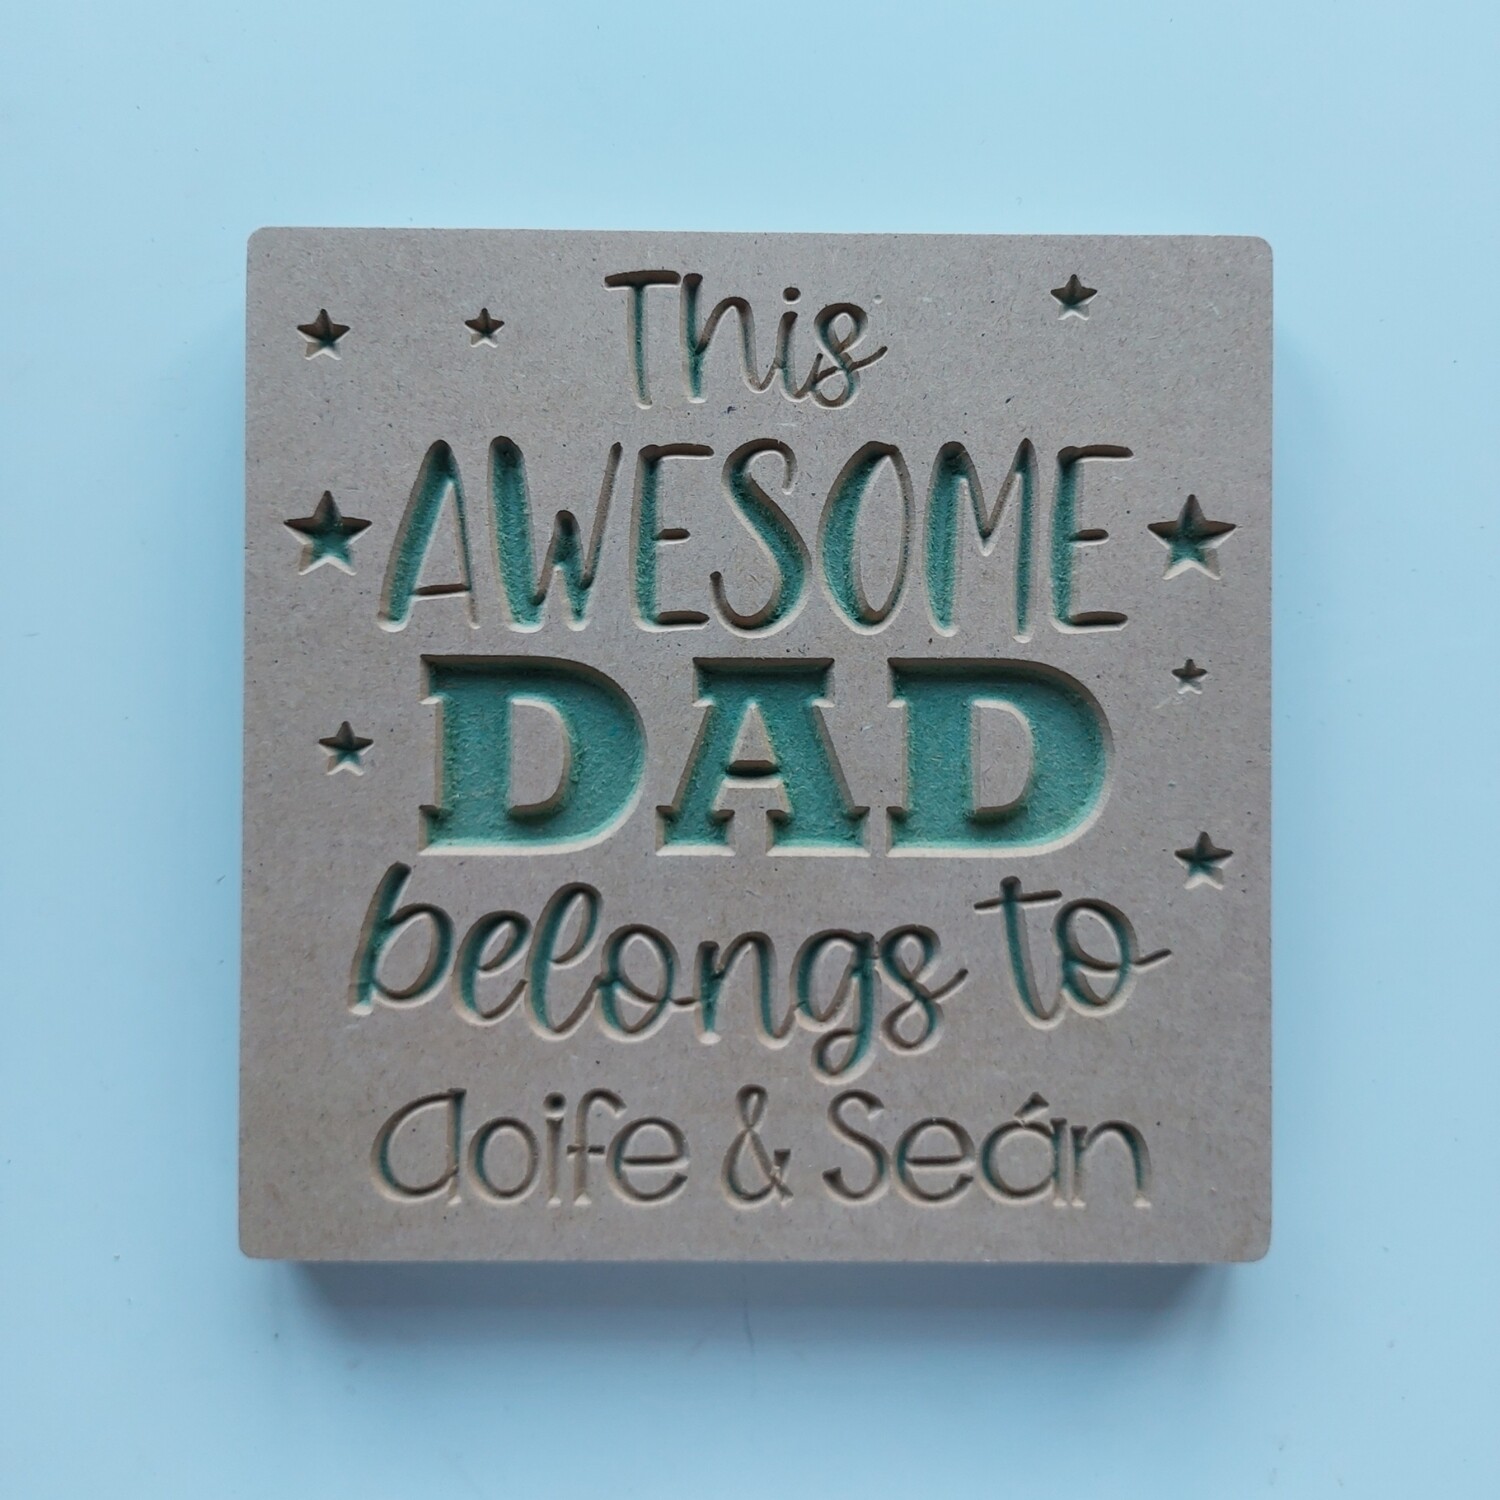 This Awesome DAD belongs to.. 18mm